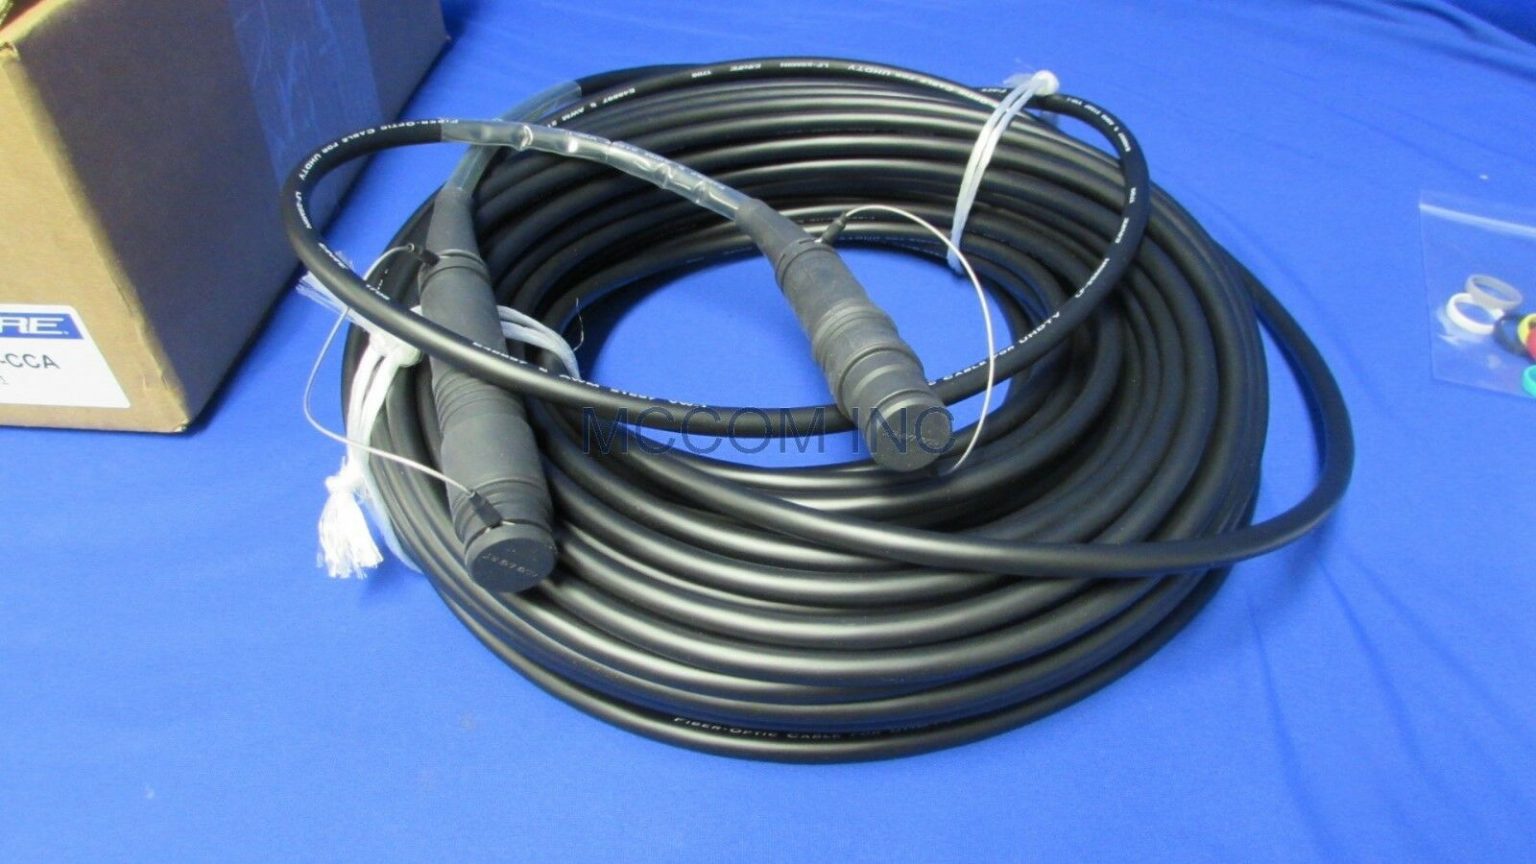 Canare SMPTE 311 Fiber Camera Cable 50 Meter /164 feet - New